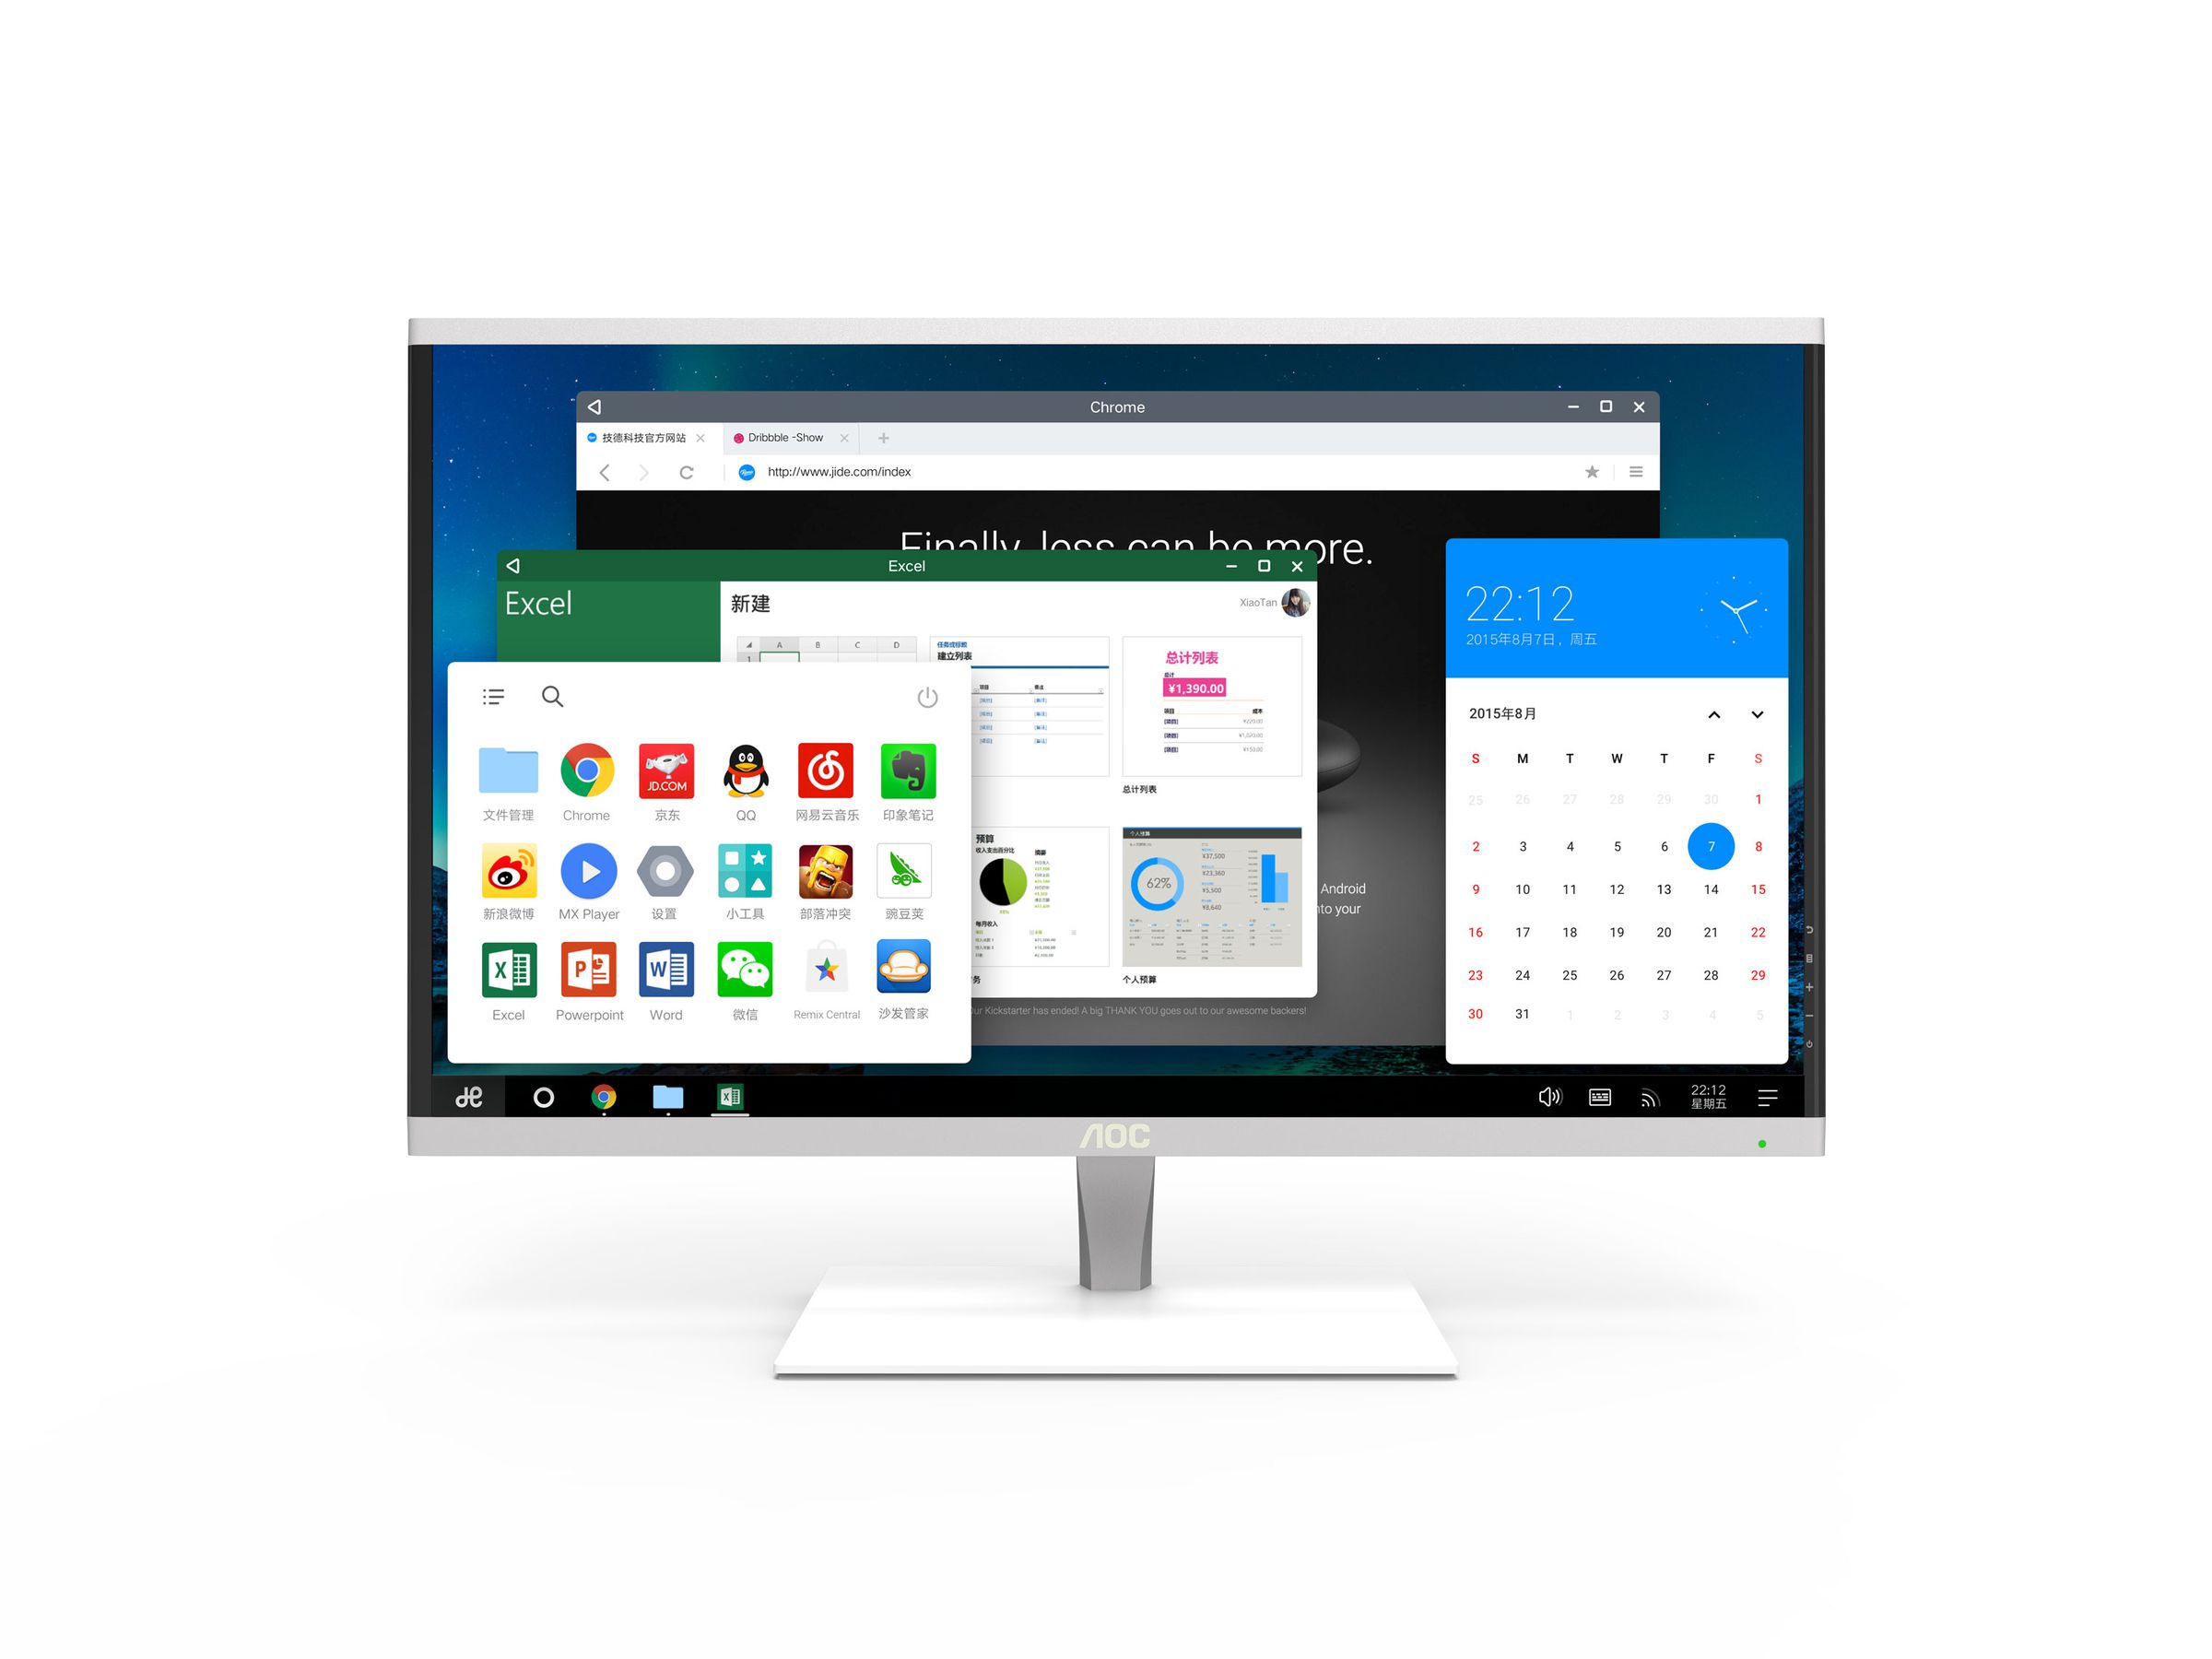 Jide's first Remix OS all-in-one PC